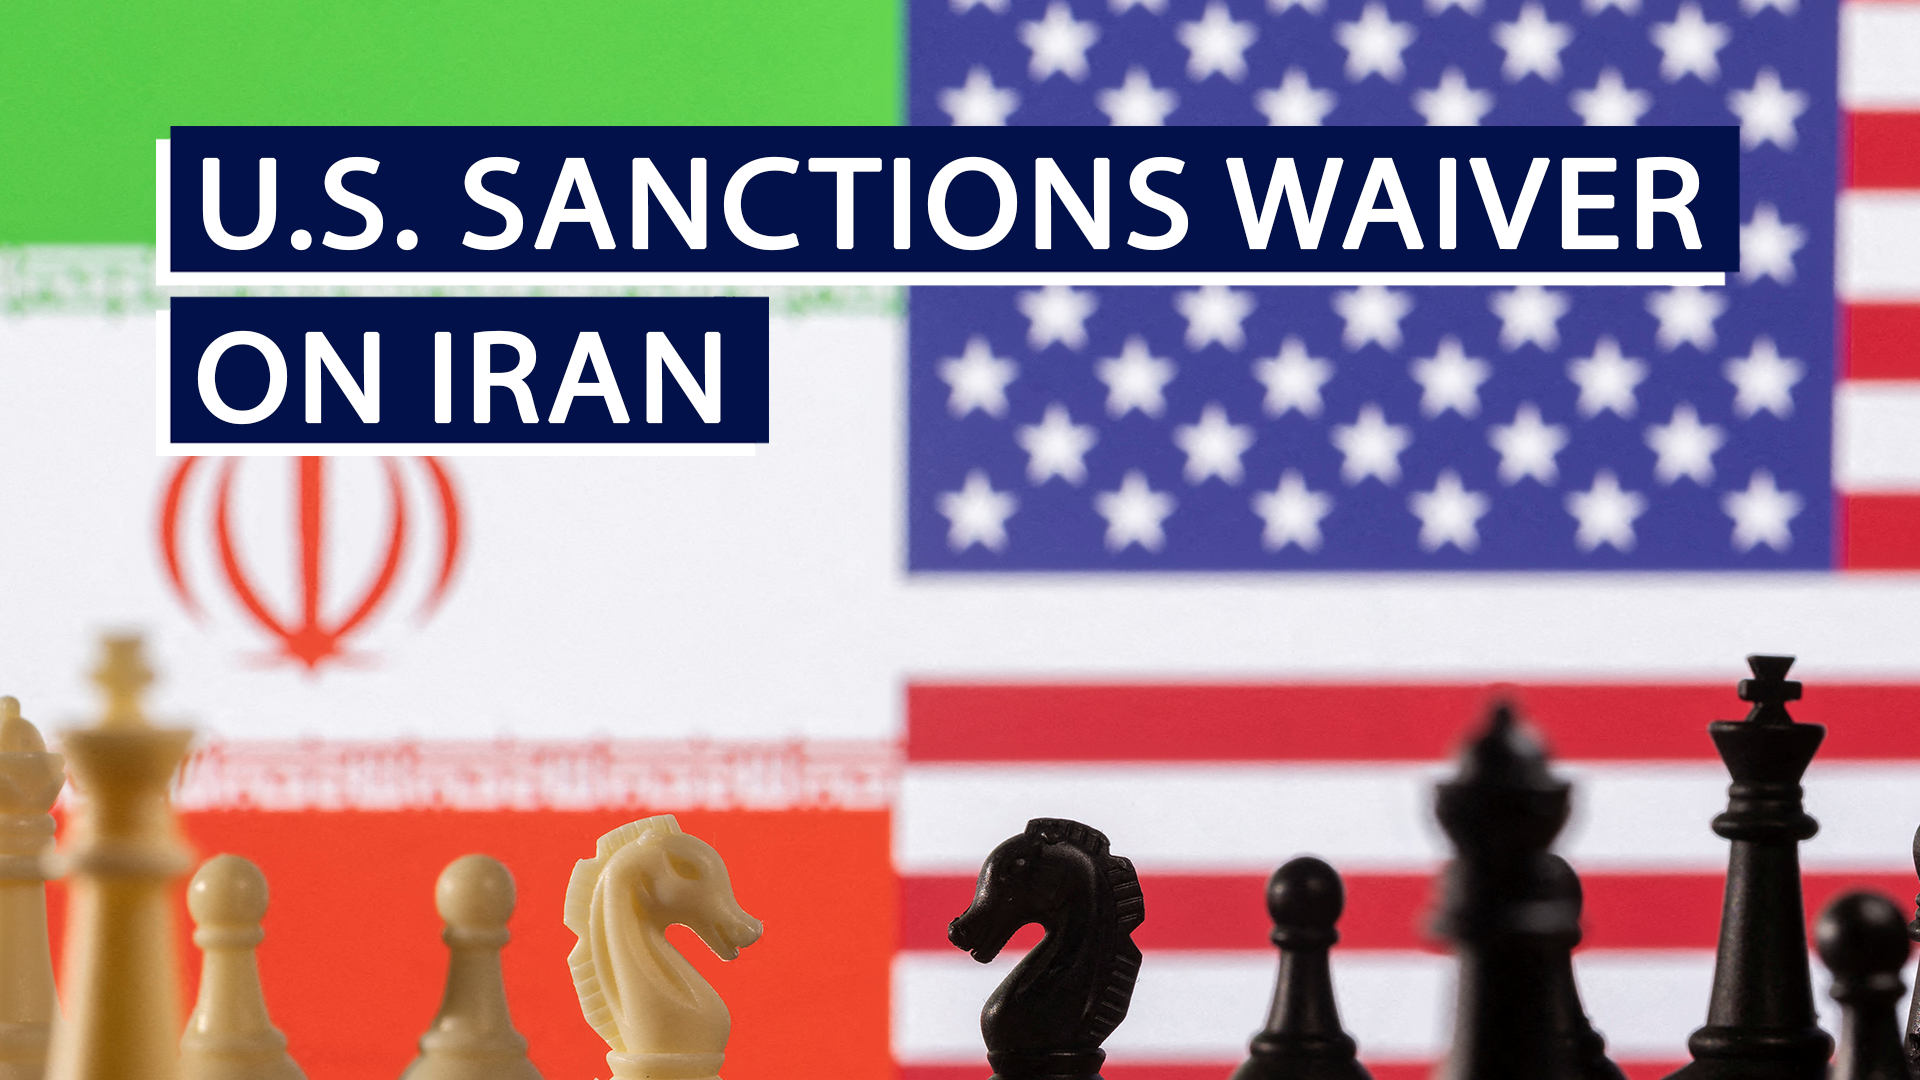 US sanctions waiver on Iran does not benefit ordinary Iranians